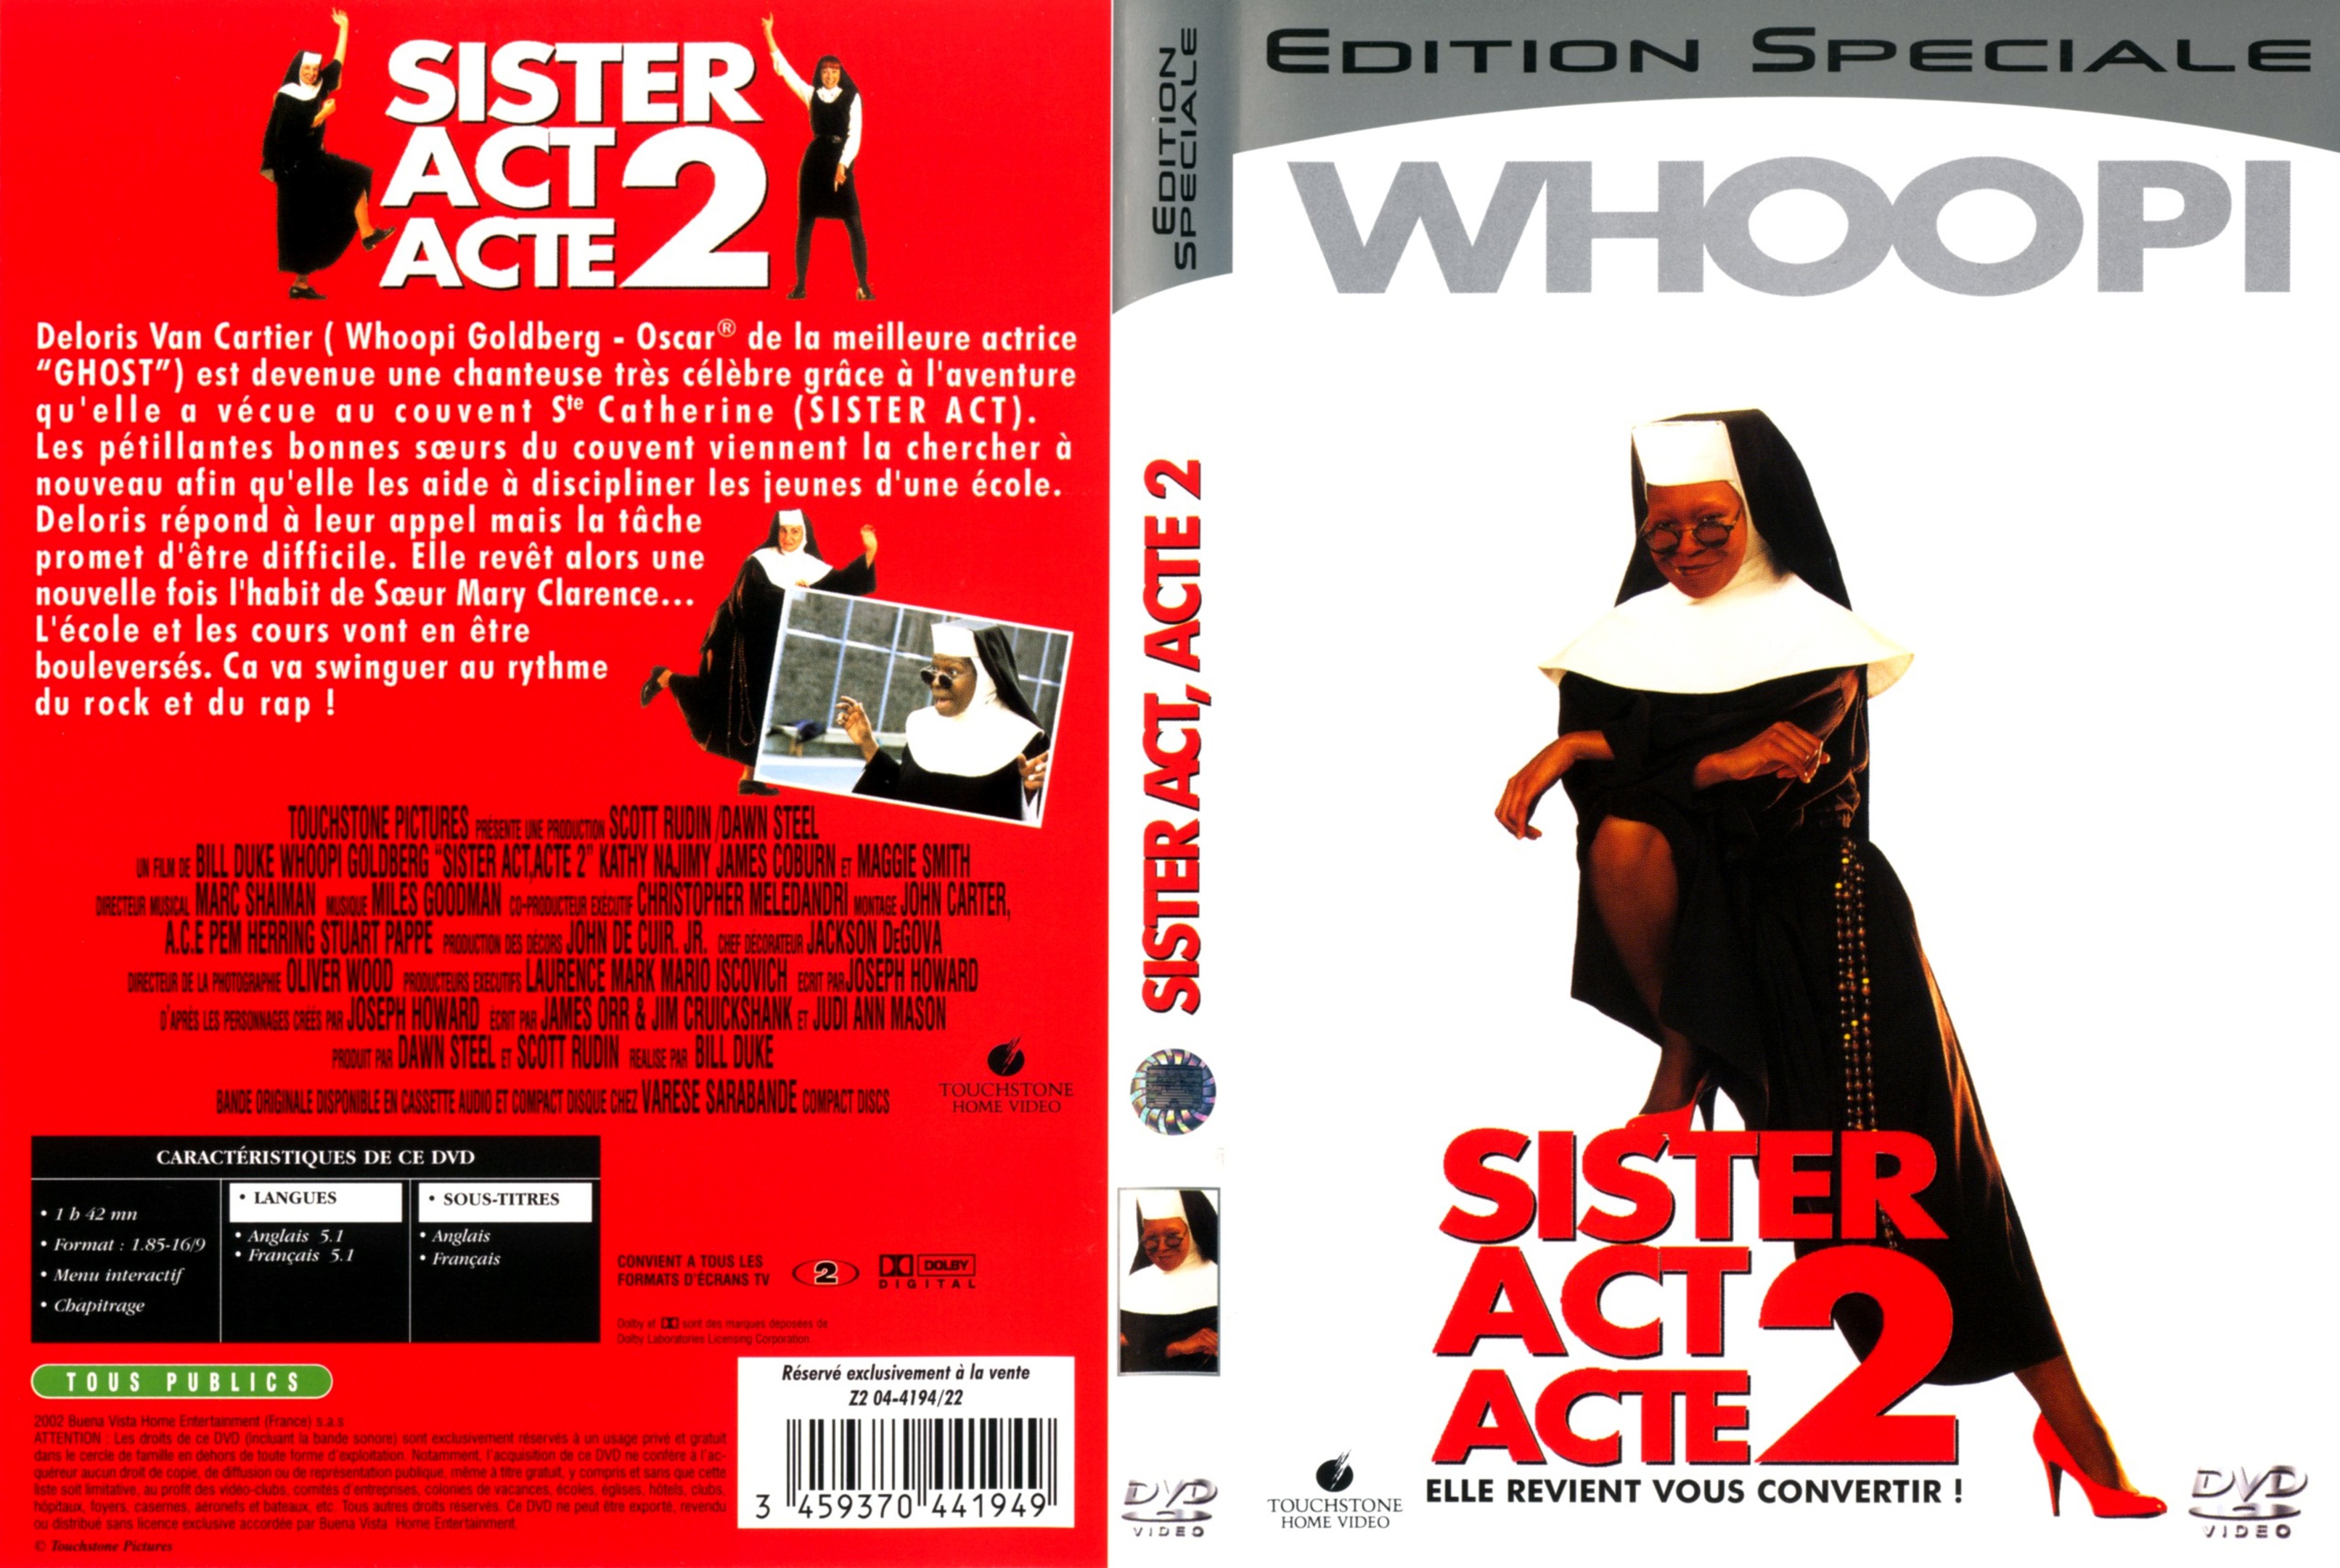 Jaquette DVD Sister act 2